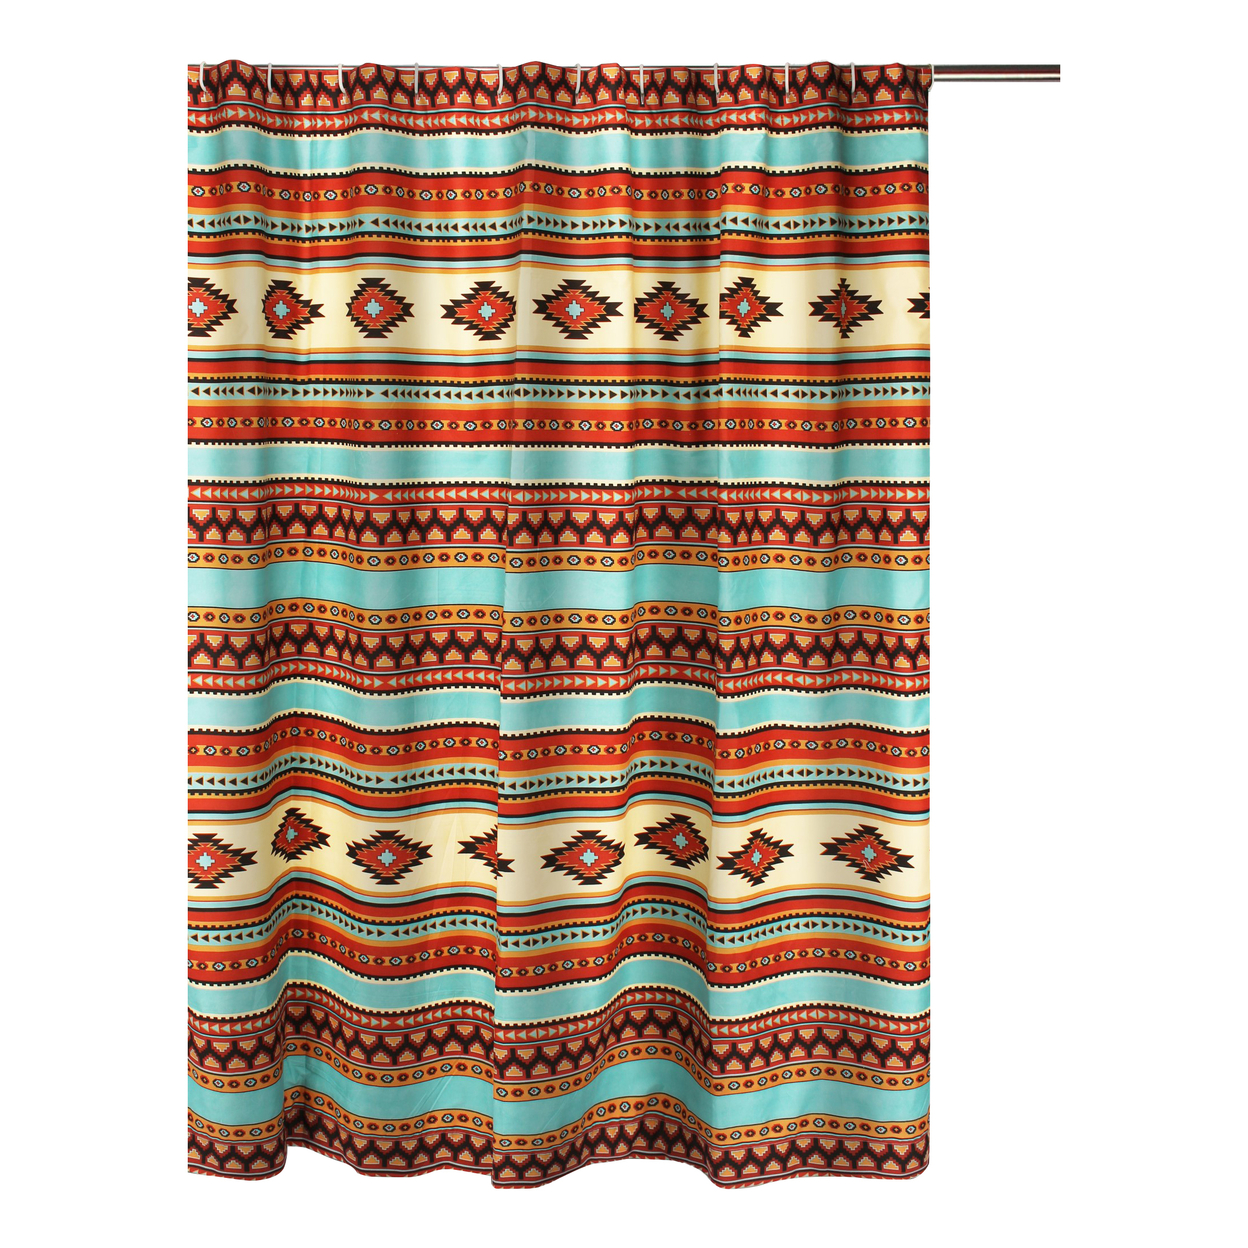 Tagus 72 Inch Shower Curtain, Natural Southwest Patterns, Button Holes